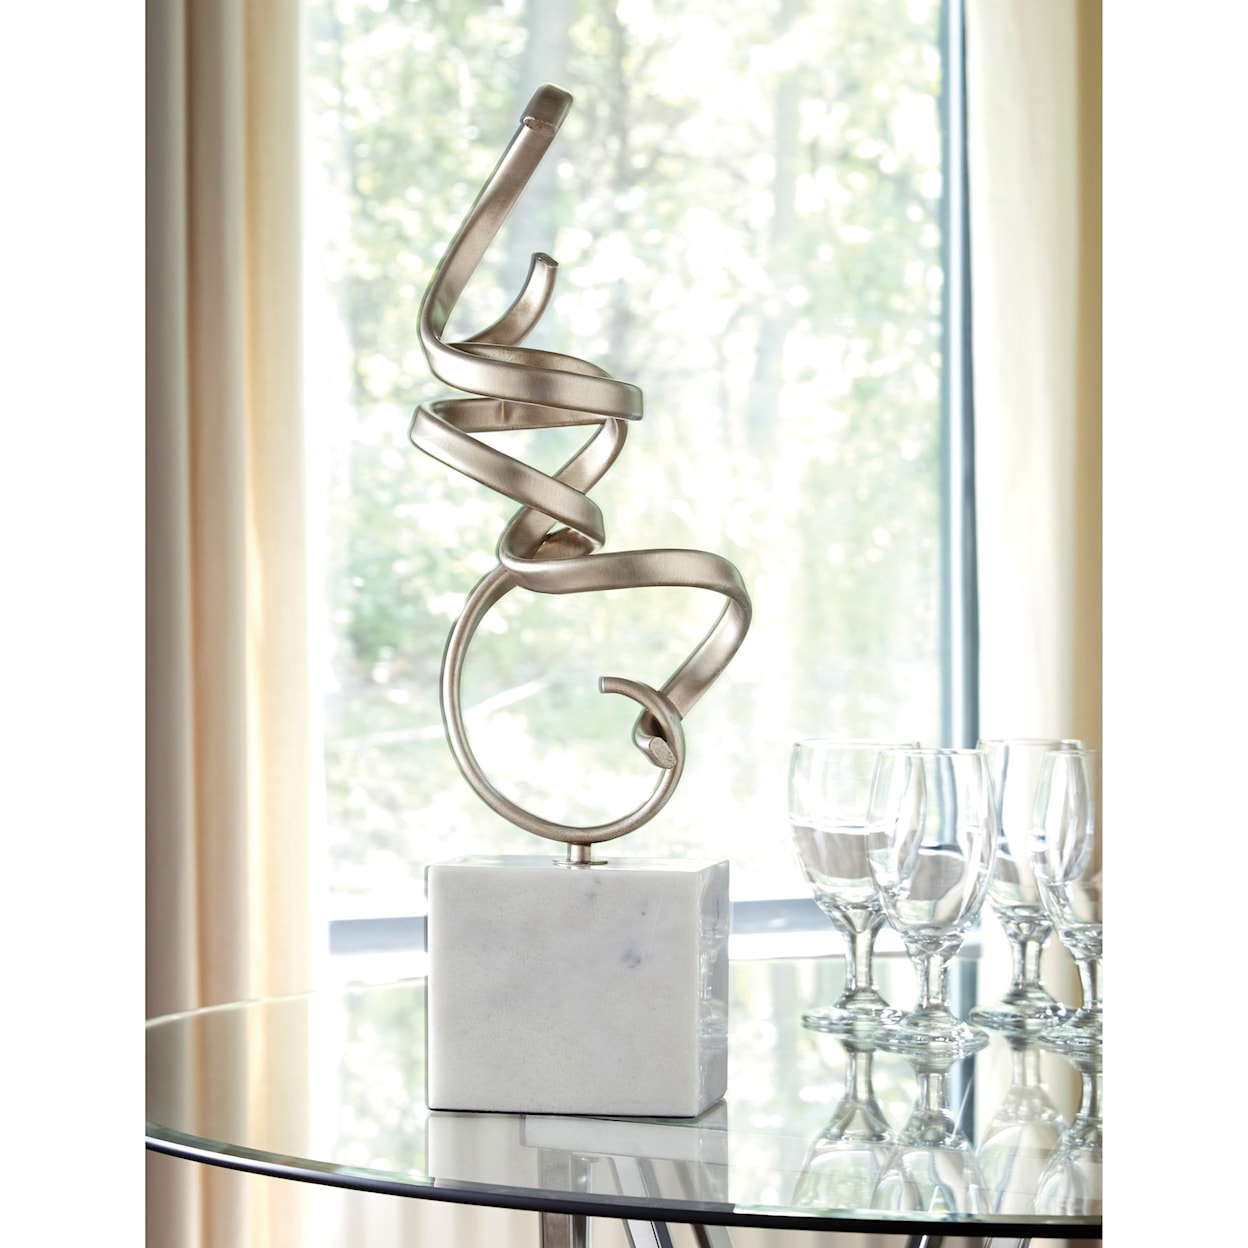 Ashley Accents Pallaton Champagne Finished/White Sculpture